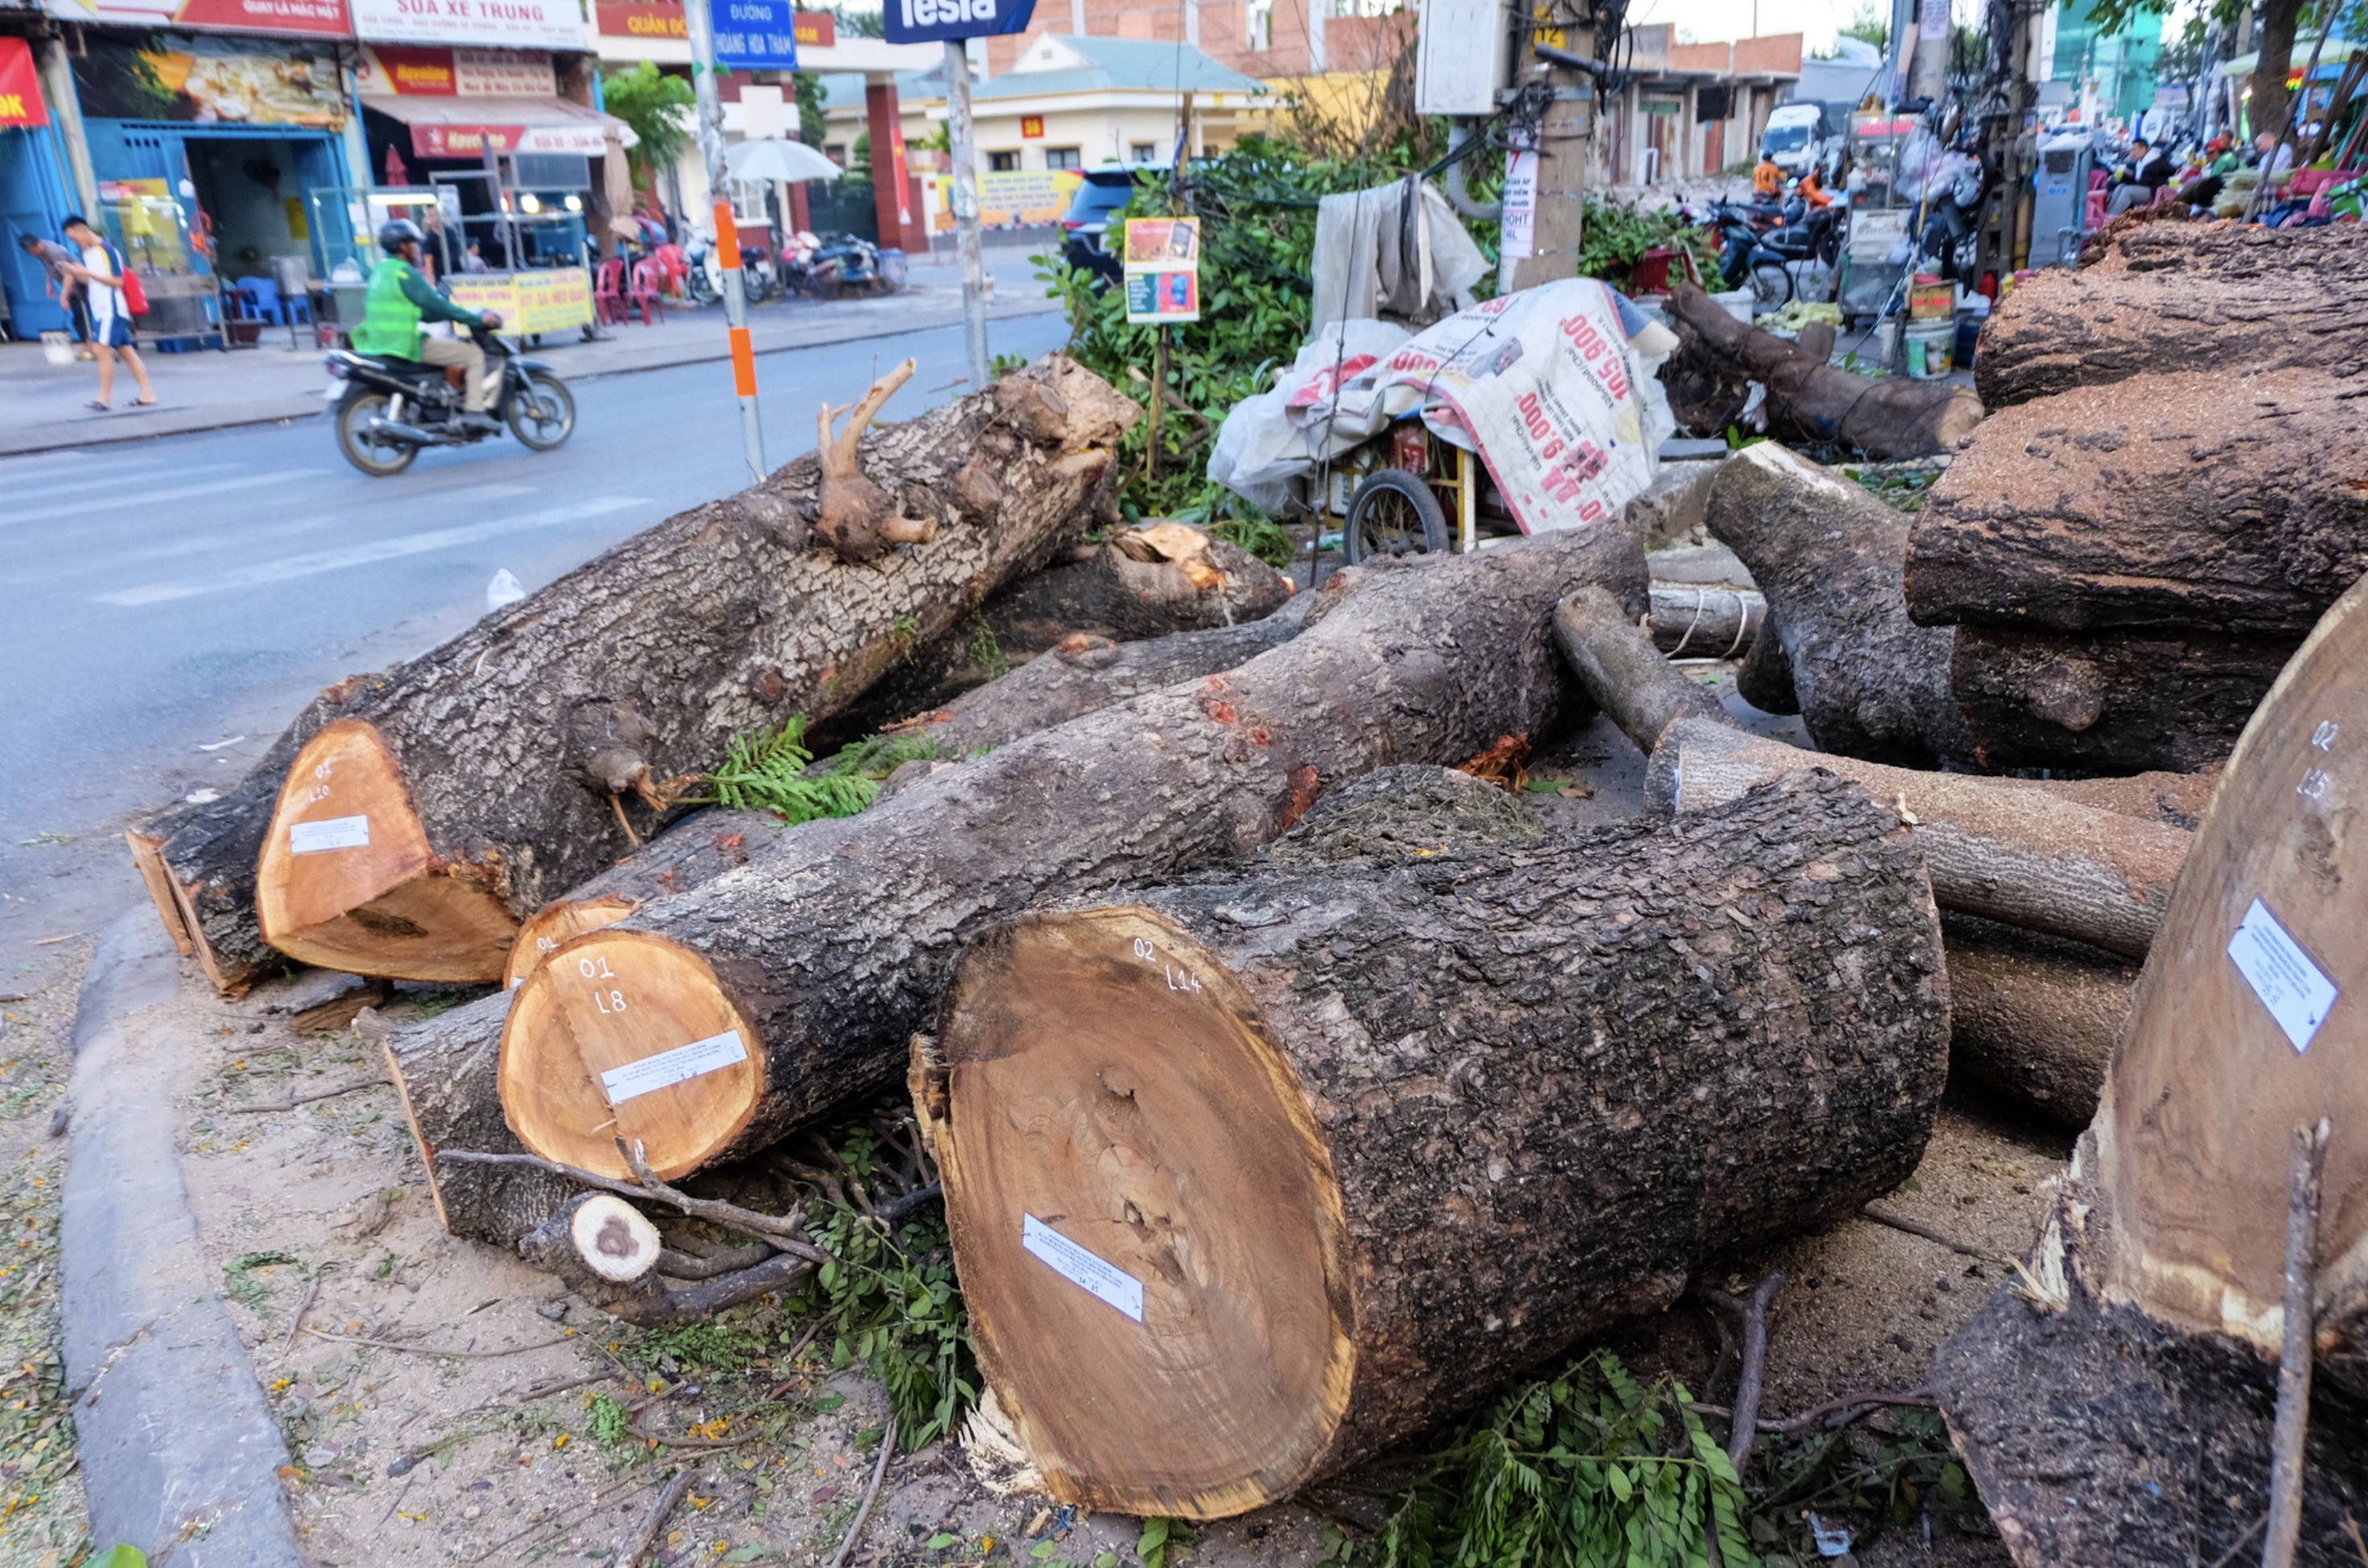 Logs piled up on a pavement along Hoang Hoa Tham Street after the felling. Photo: Phuong Nhi / Tuoi Tre